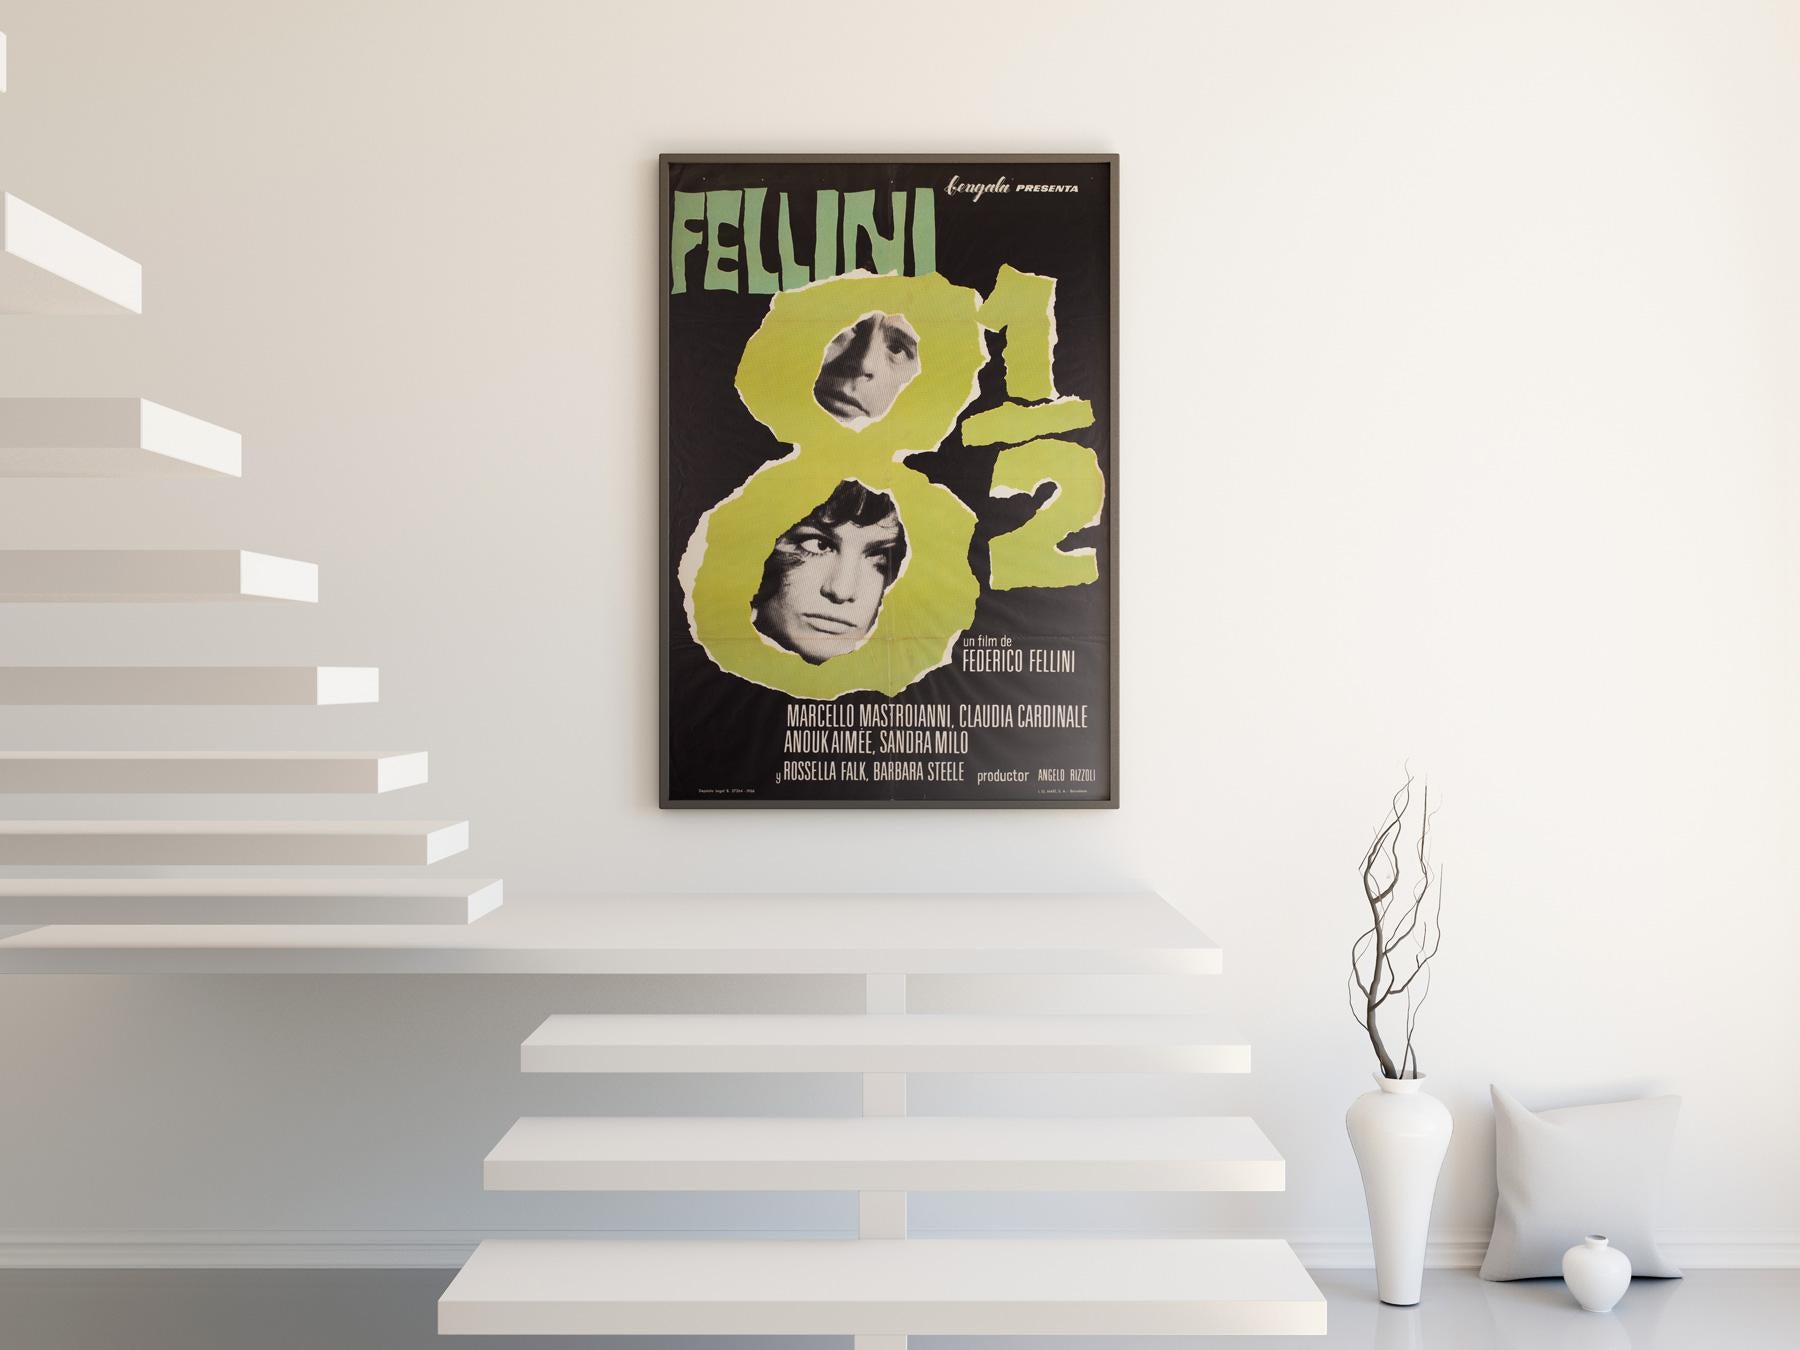 Original first-year-of-release Spanish film poster for Fellini's classic 8 1/2. 

This vintage movie poster is sized 26 1/2 x 39 inches and will be sent rolled (unframed).

Year 1963
Poster Type Spanish 1 Sheet
Style -
Art by